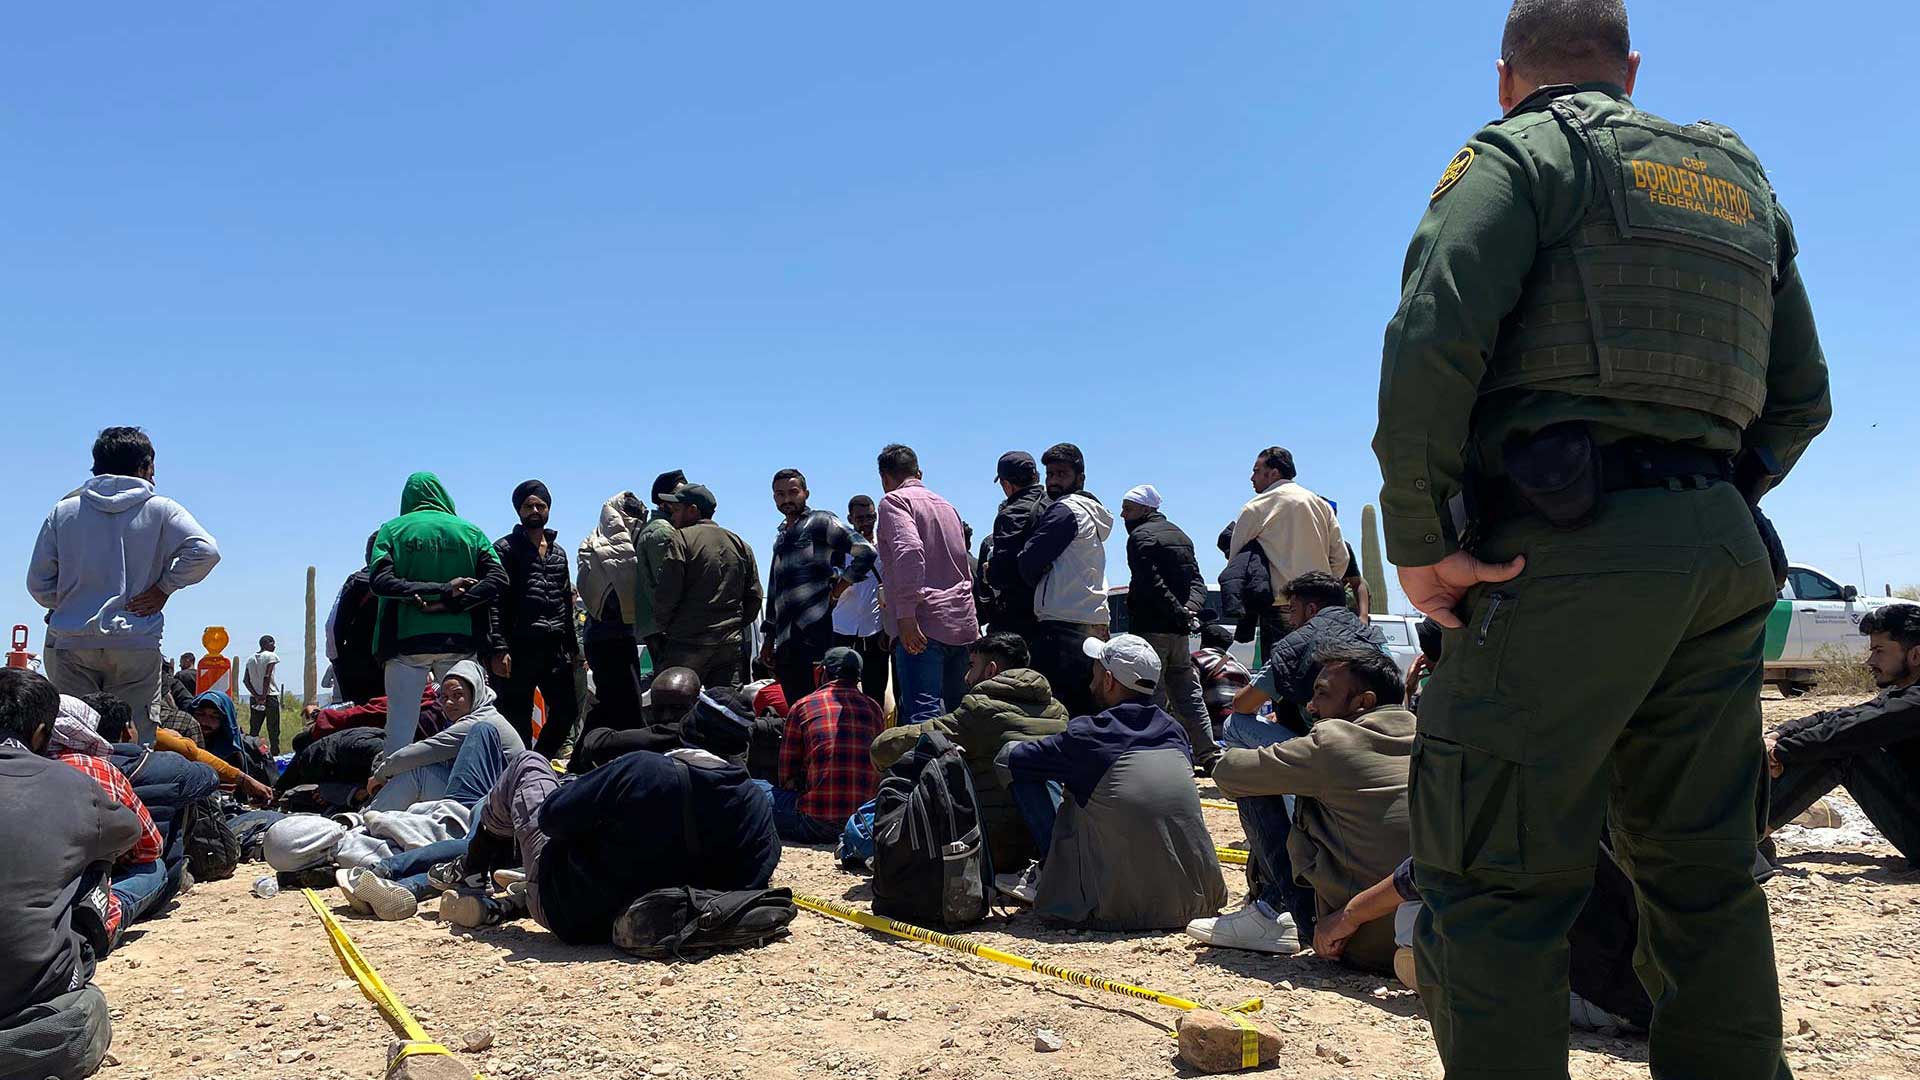 In August, Border Patrol's Tucson Sector saw a 16-year high with nearly 49,000 unauthorized migrants apprehended.